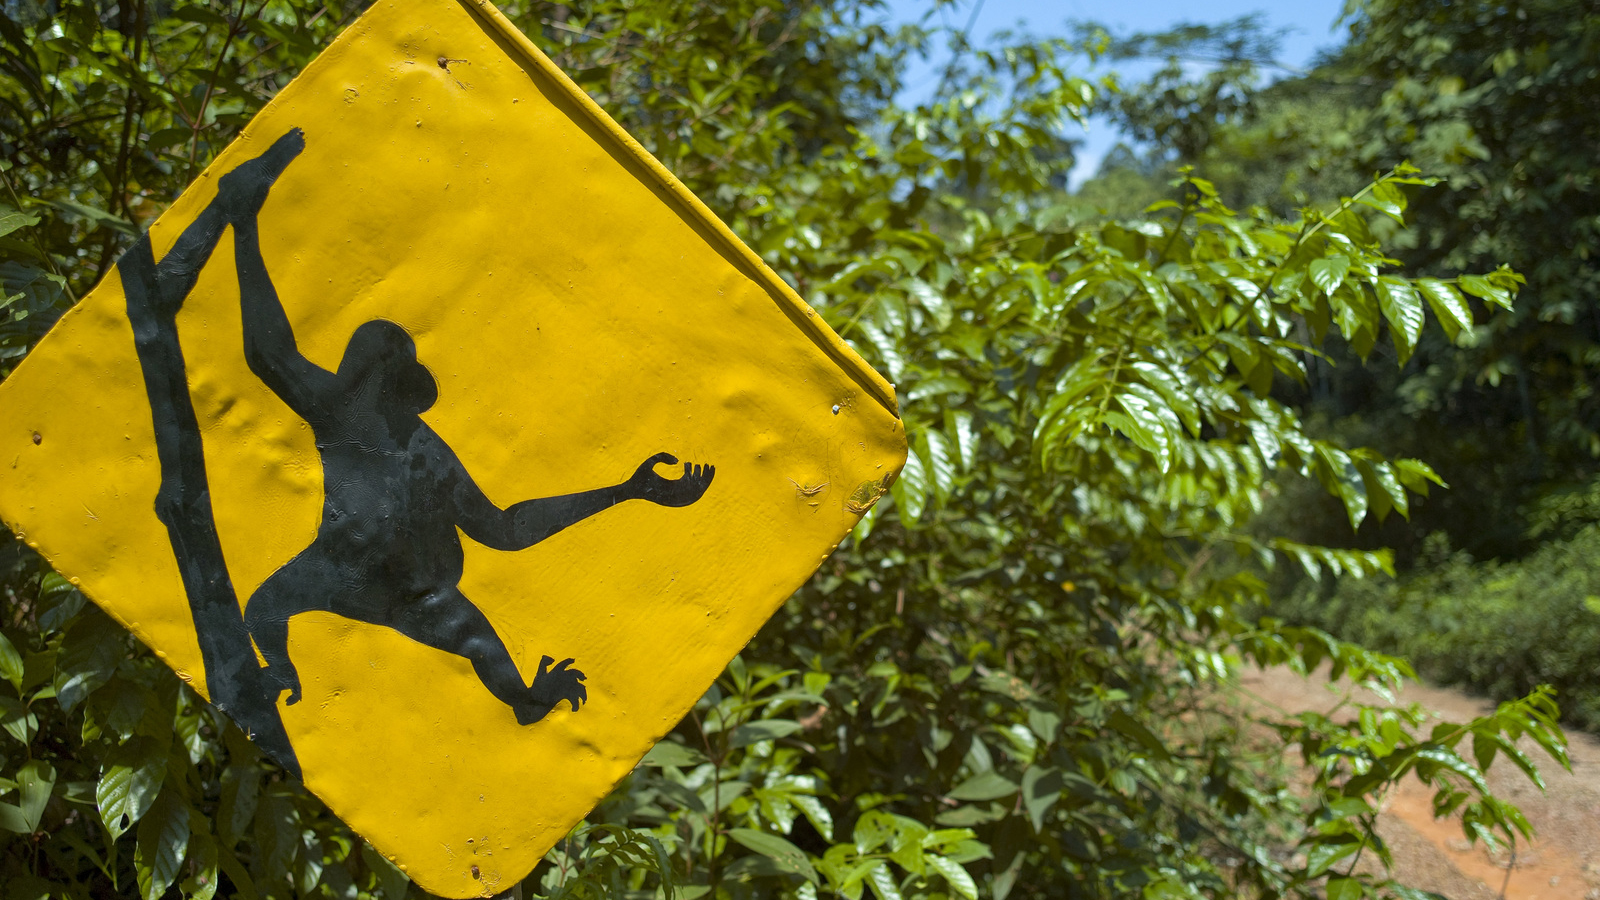 Cautionary road sign to lookout for Orangutan in the remote Wehea Forest in the Berau district of the eastern Kalimantan region of Borneo, Indonesia. Photo © Bridget Besaw